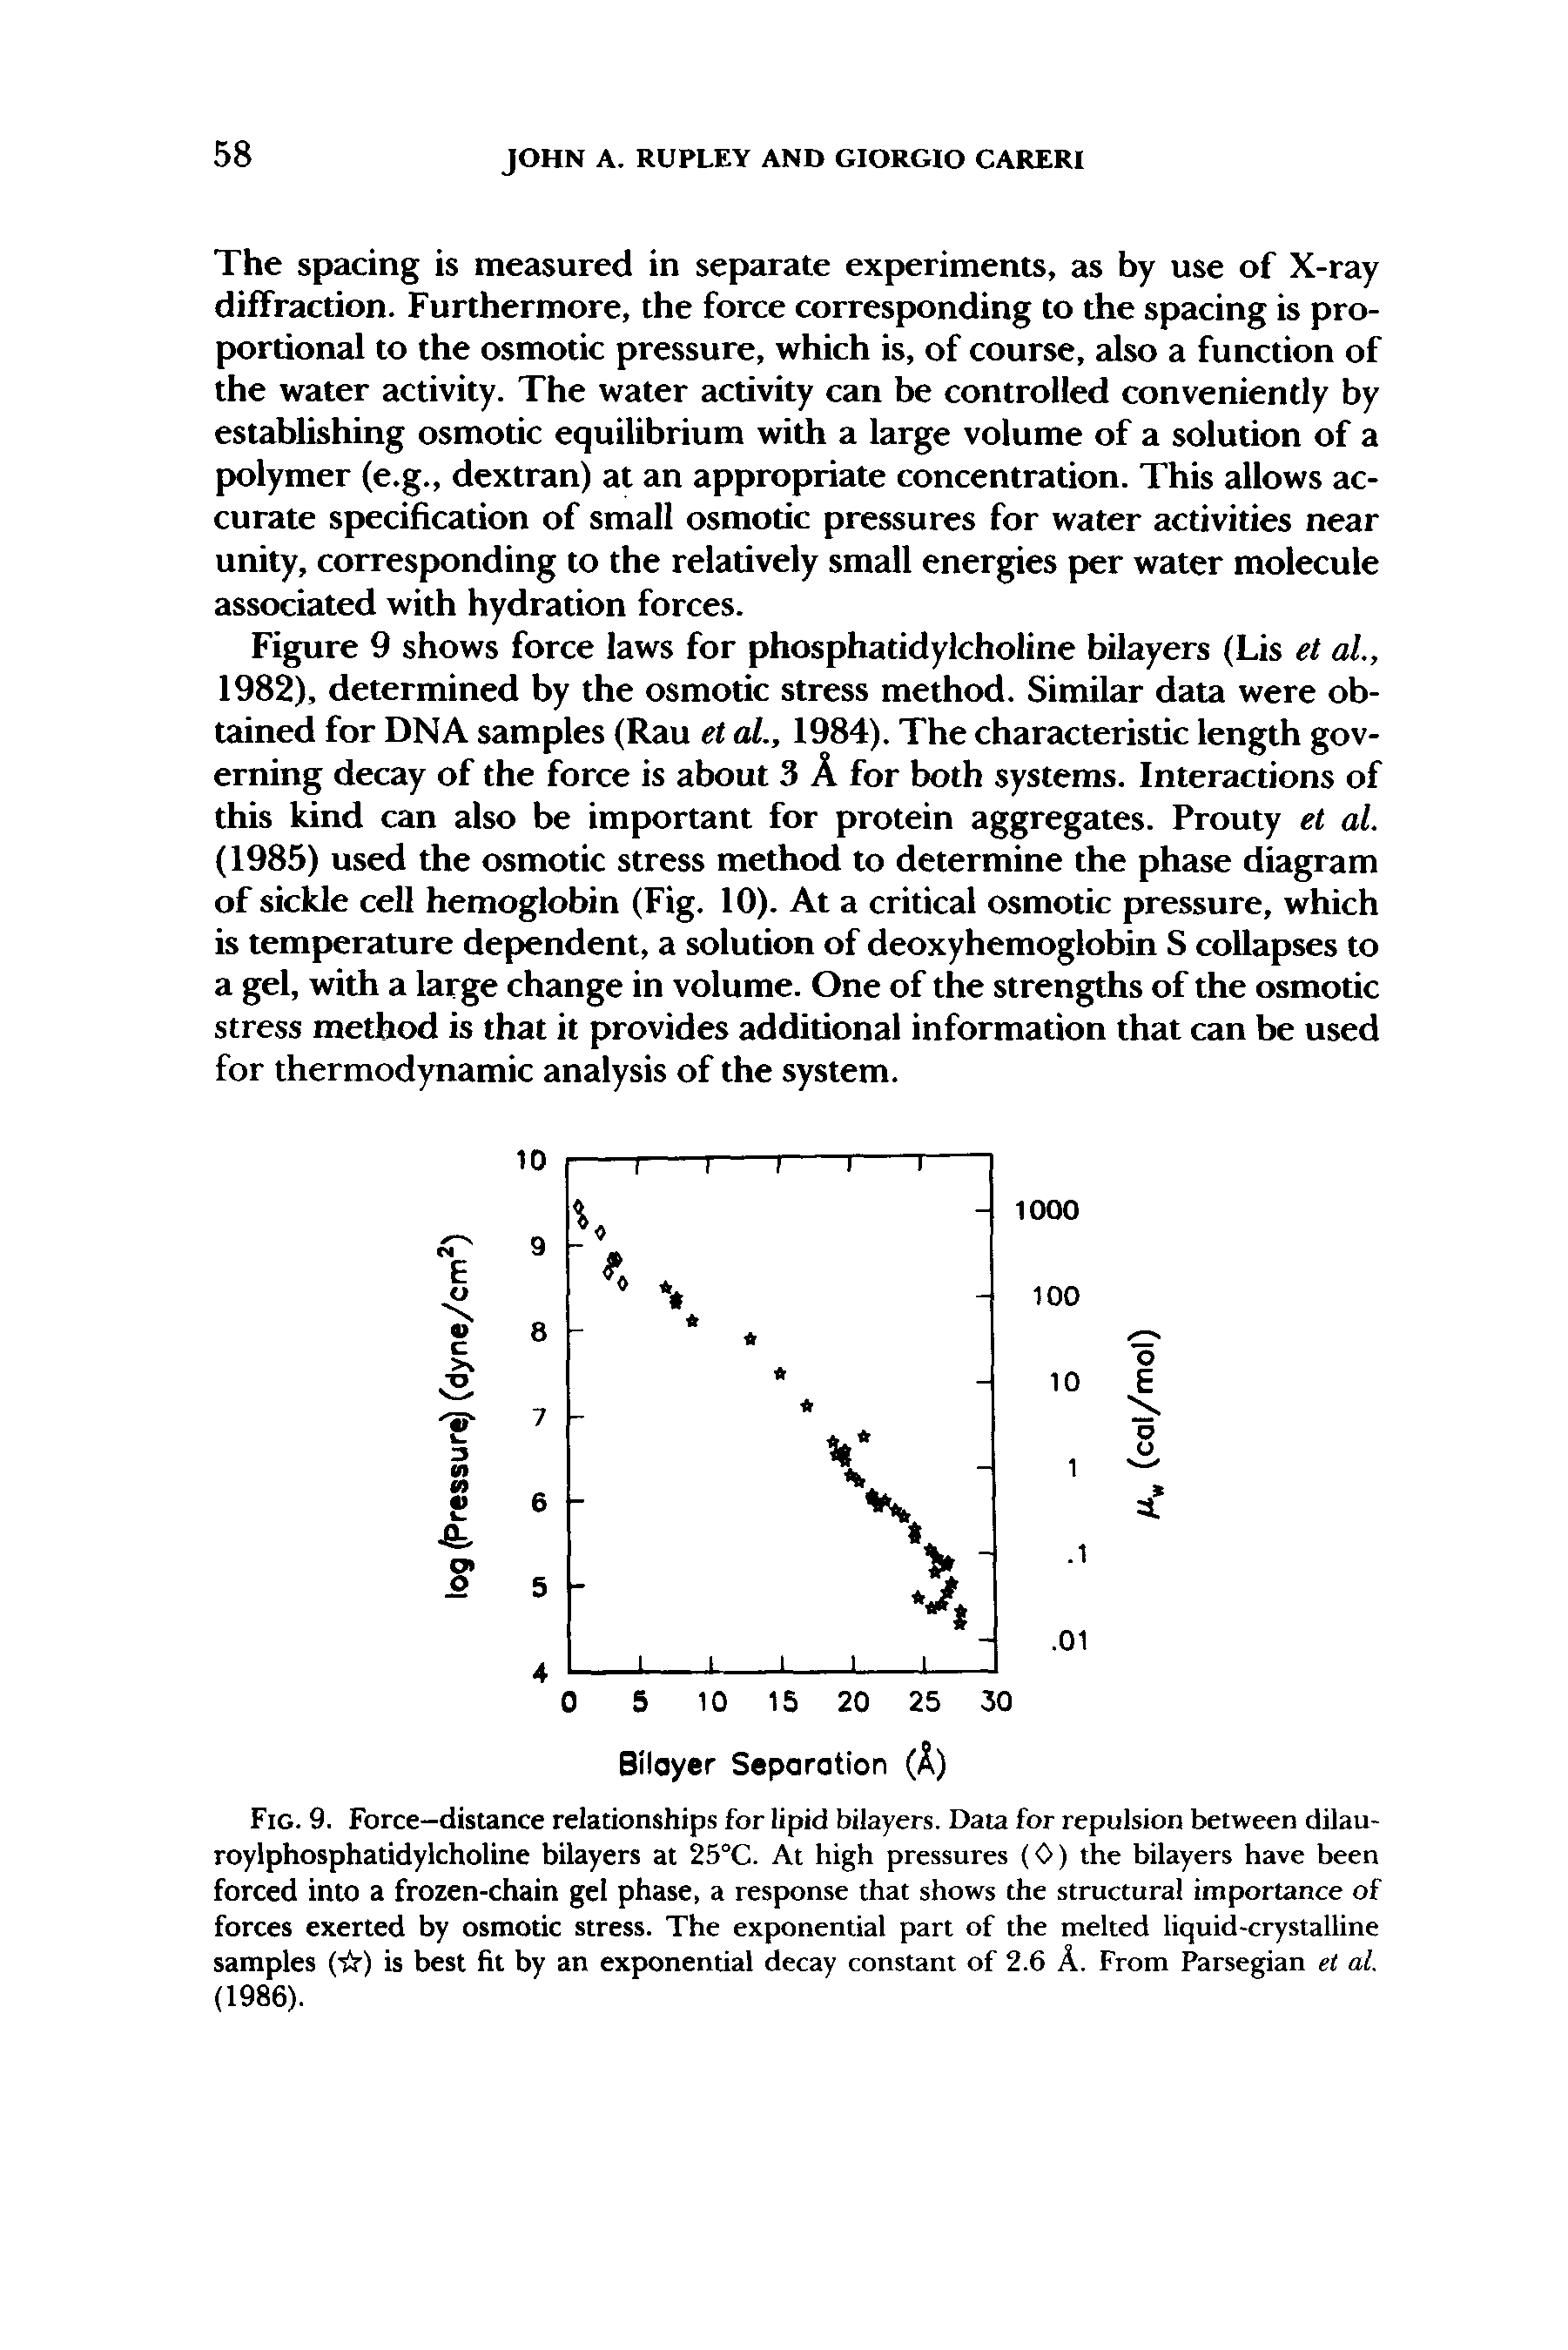 Fig. 9. Force-distance relationships for lipid bilayers. Data for repulsion between dilau-roylphosphatidylcholine bilayers at 25°C. At high pressures (0) the bilayers bave been forced into a frozen-chain gel phase, a response that shows the structural importance of forces exerted by osmotic stress. The exponential part of the melted liquid-crystalline samples ( ) is best fit by an exponential decay constant of 2.6 A. From Parsegian et al. (1986).